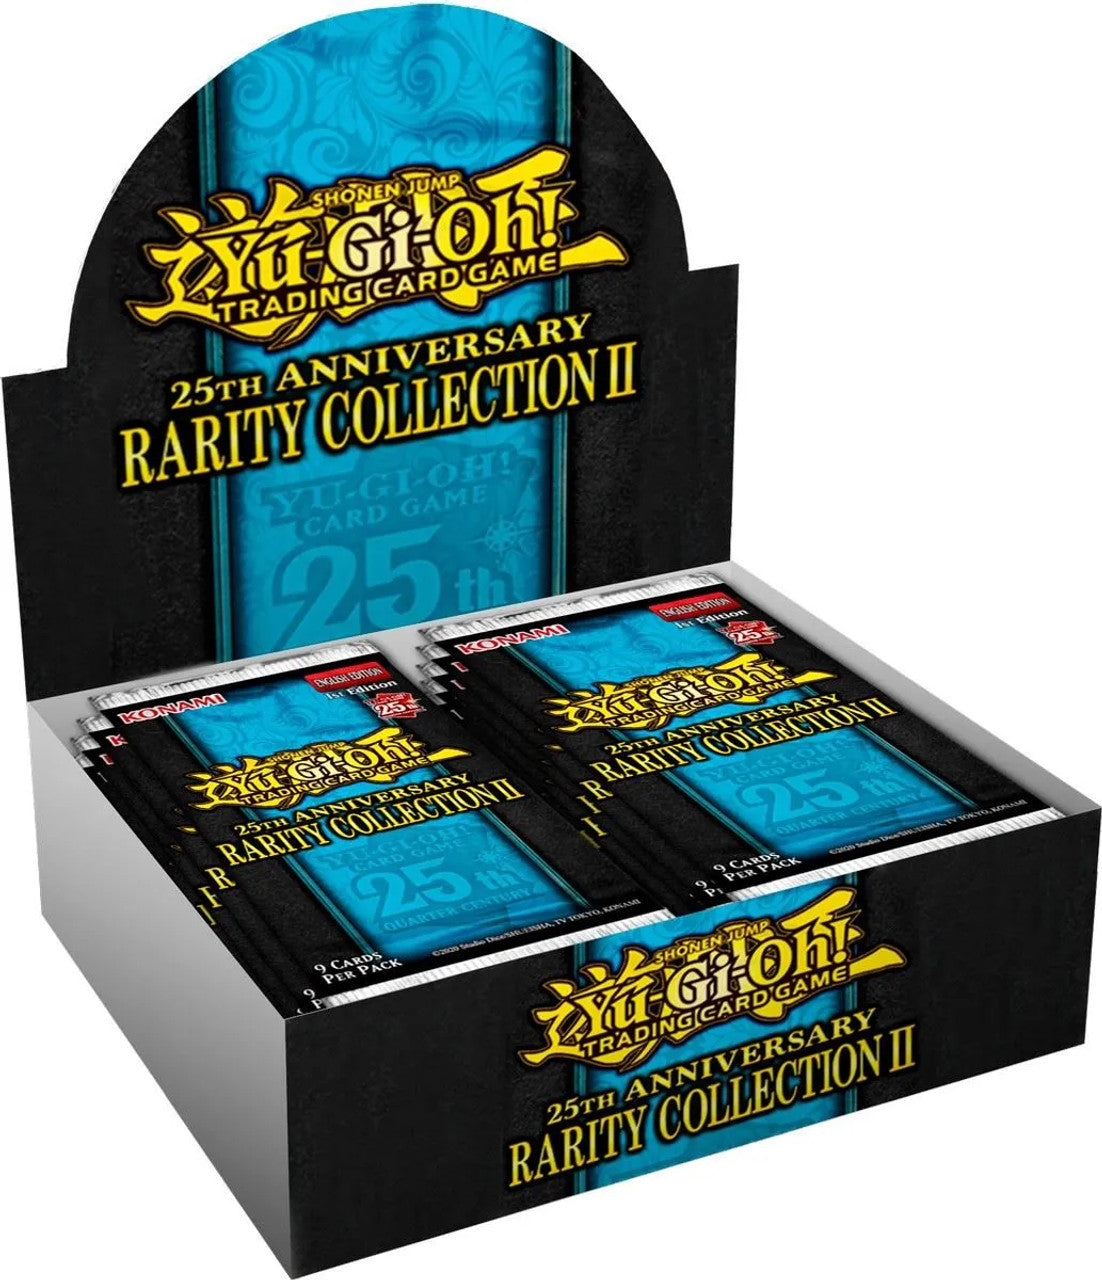 Yugioh! Booster Boxes: 25th Anniversary Rarity Collection II *Sealed* [RA02] (PRE-ORDER, SHIPS MAY 23RD)